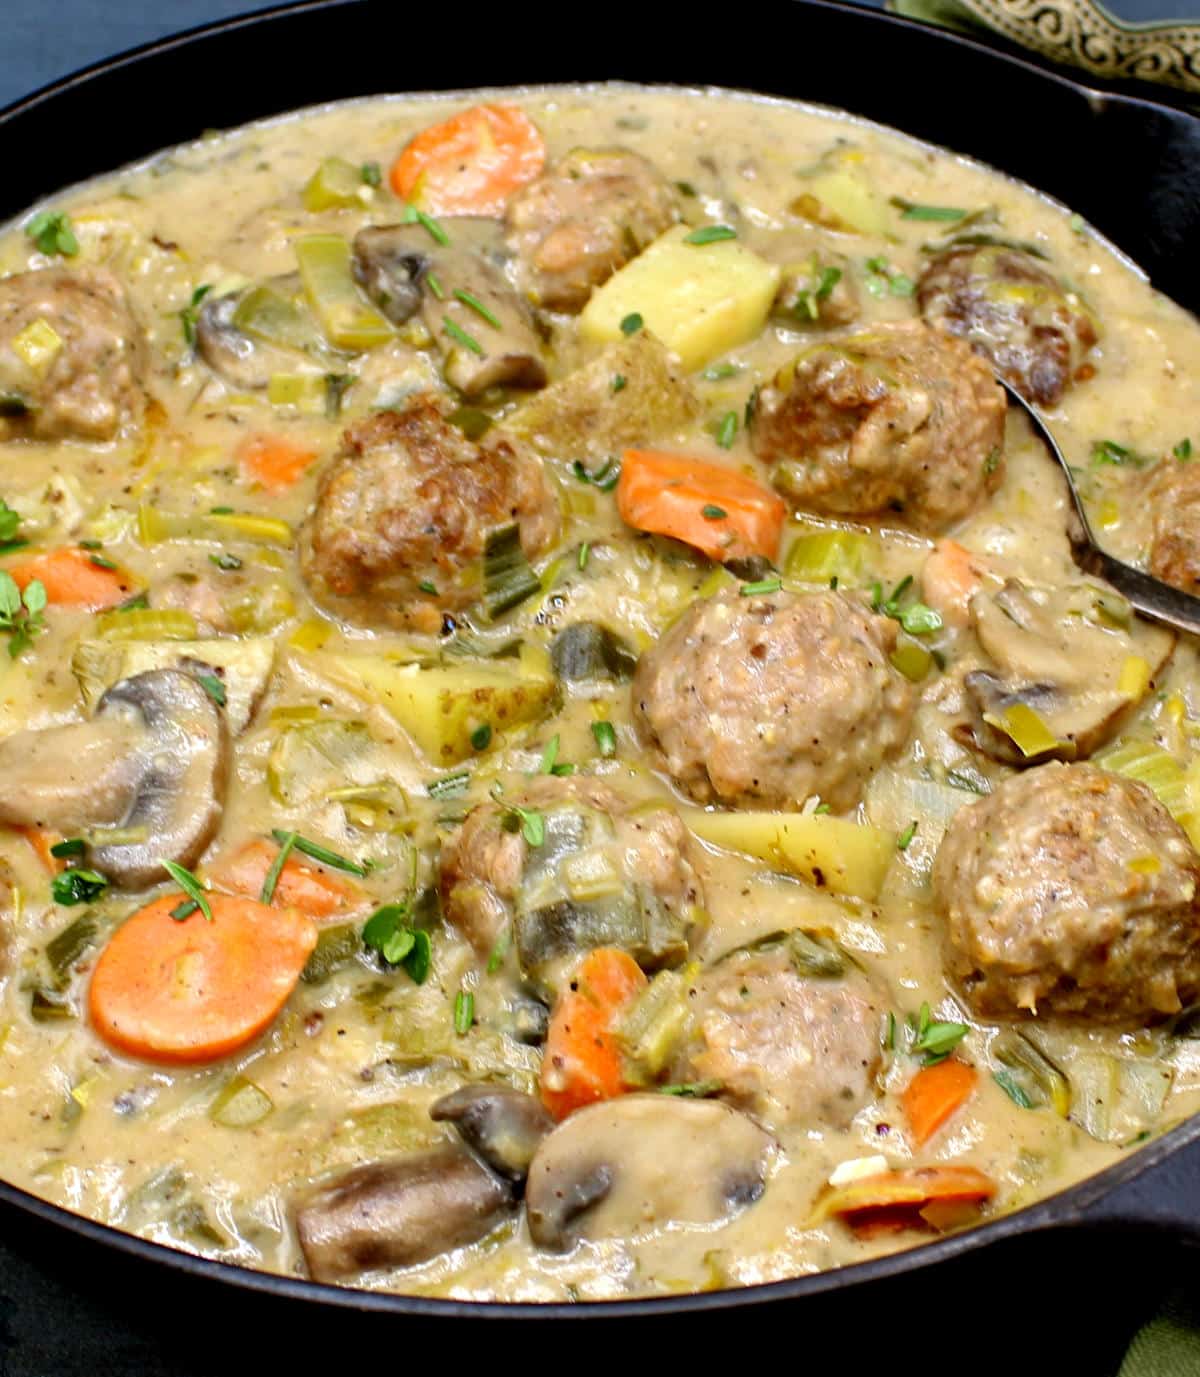 Photo of a creamy, thick vegan meatball fricassee with herbs, meatballs, carrots, potatoes, mushrooms and cajun spices.